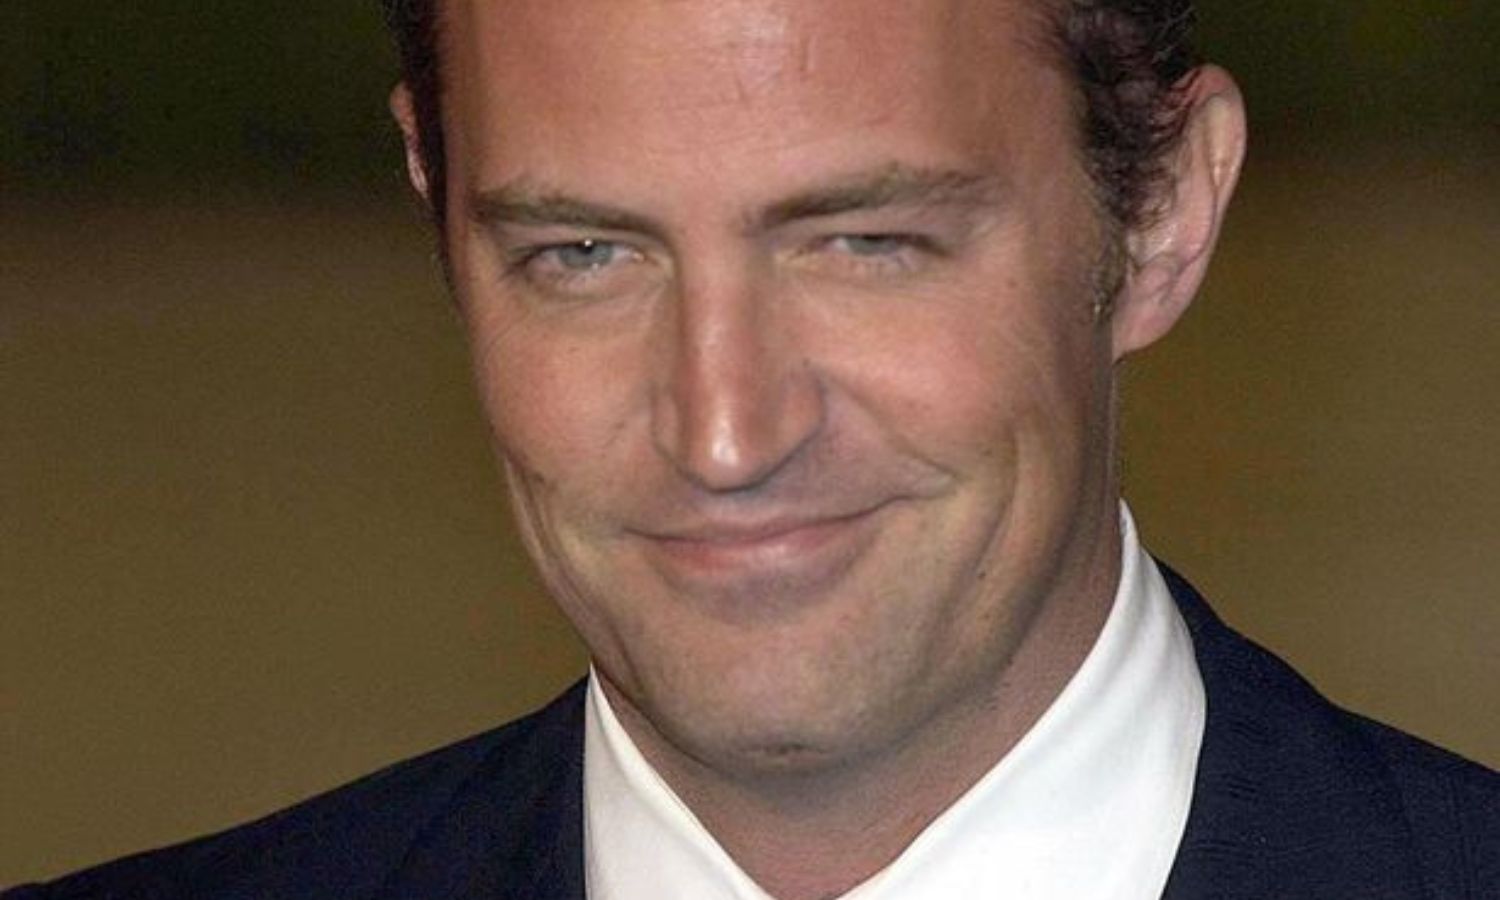 Matthew Perry toxicology reports provide insight into how star may have died: former medical examiner